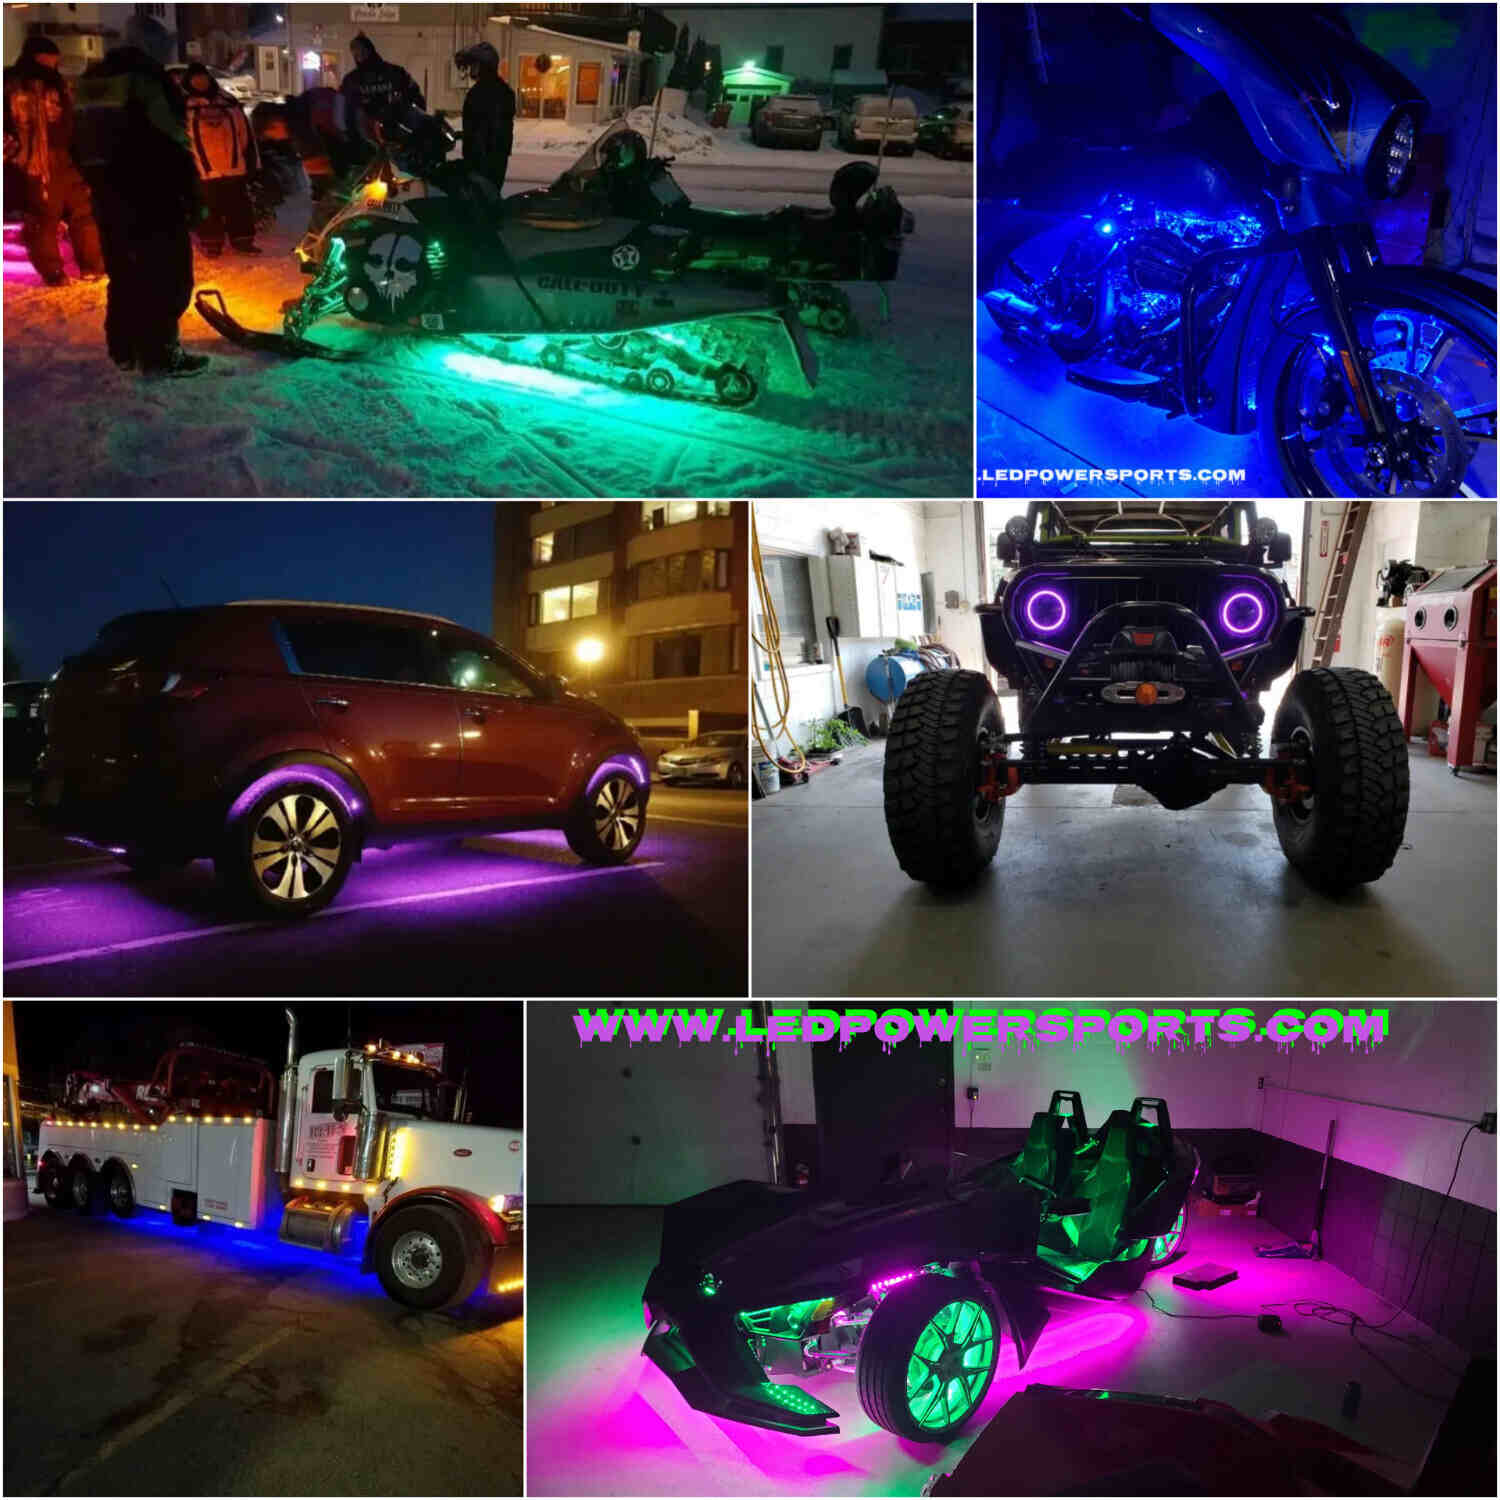 xkglow led lights installed by ledpowersports